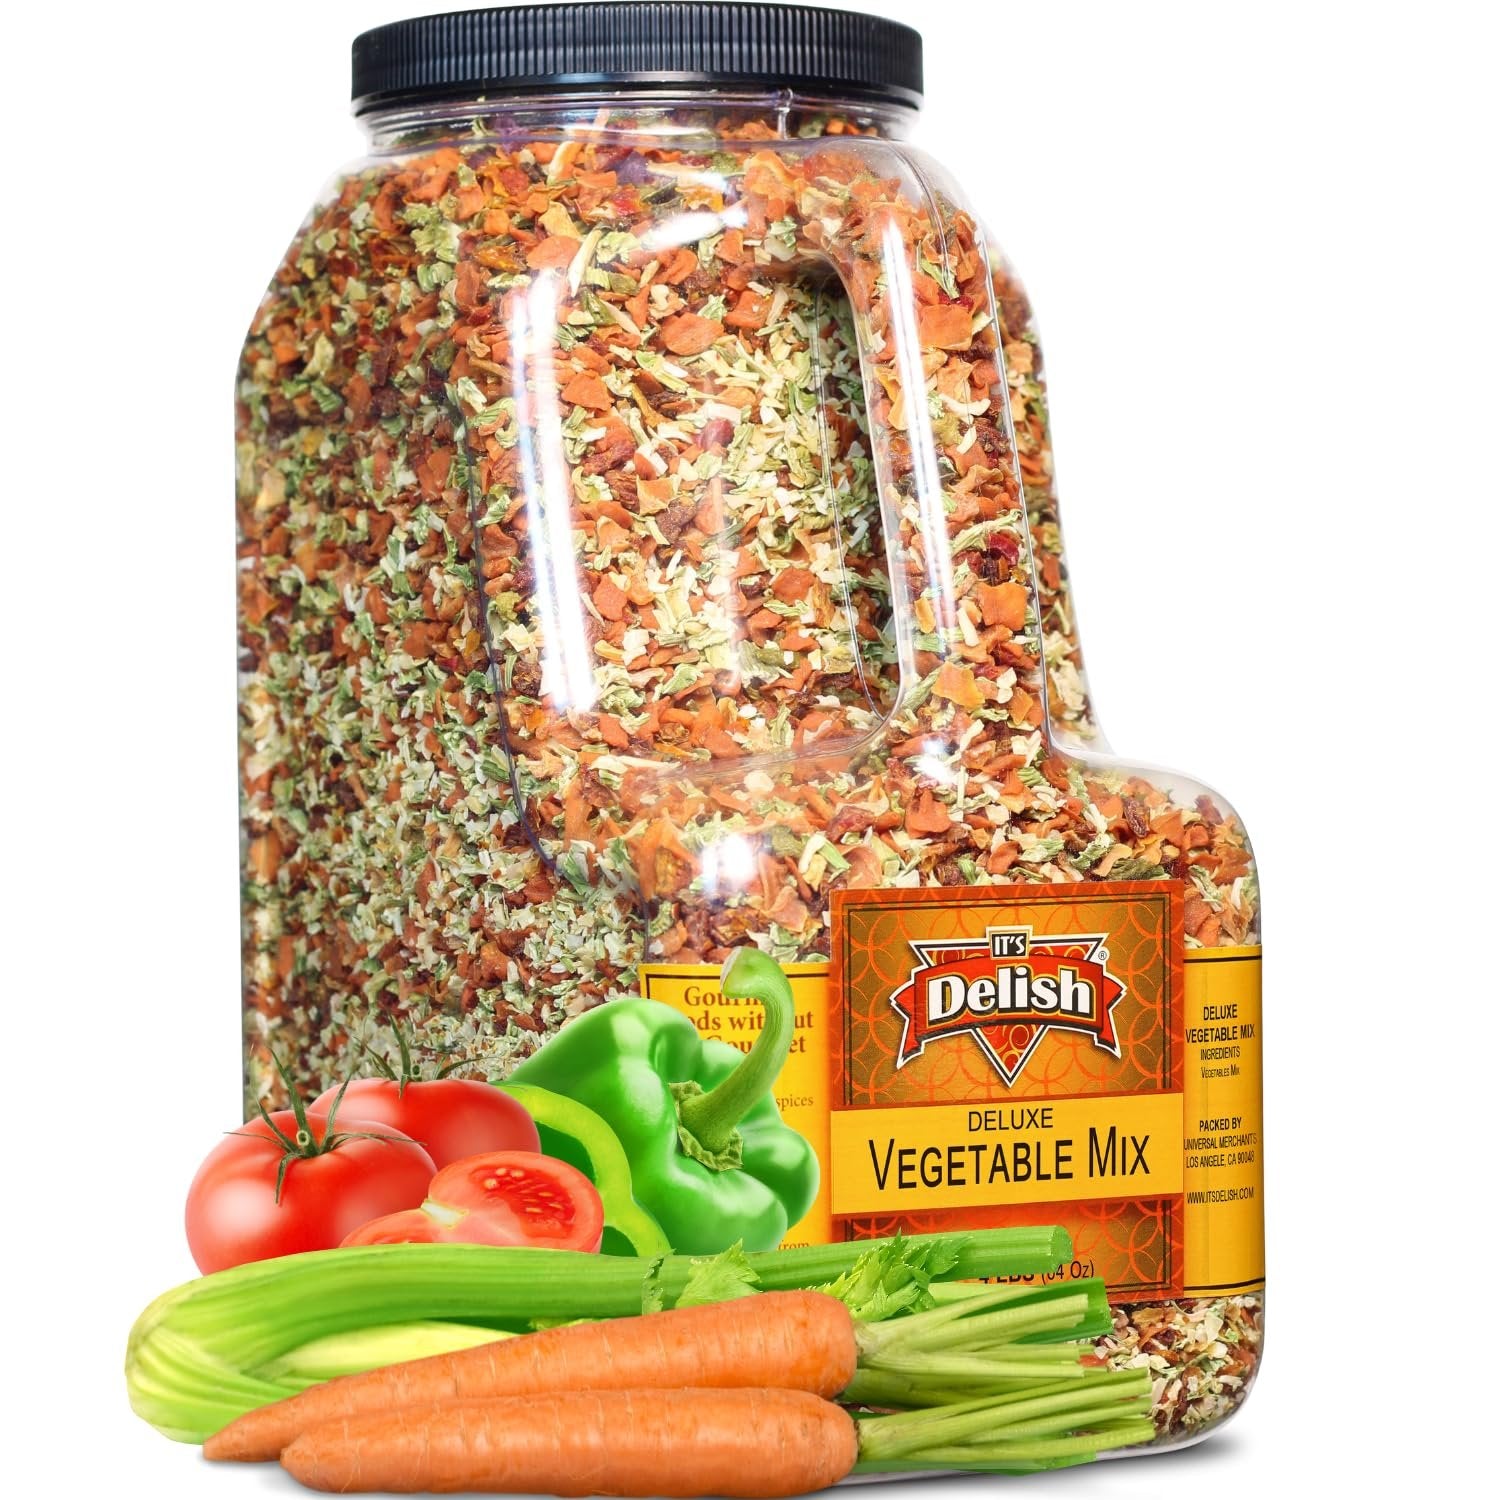 Deluxe Dried Vegetable Soup Mix by Its Delish, 4 LB Restaurant Gallon Size Jug With handle | Premium Blend of Dehydrated Vegetables | Cooking, Camping, Emergency Food Supply - No MSG, Vegan, Kosher